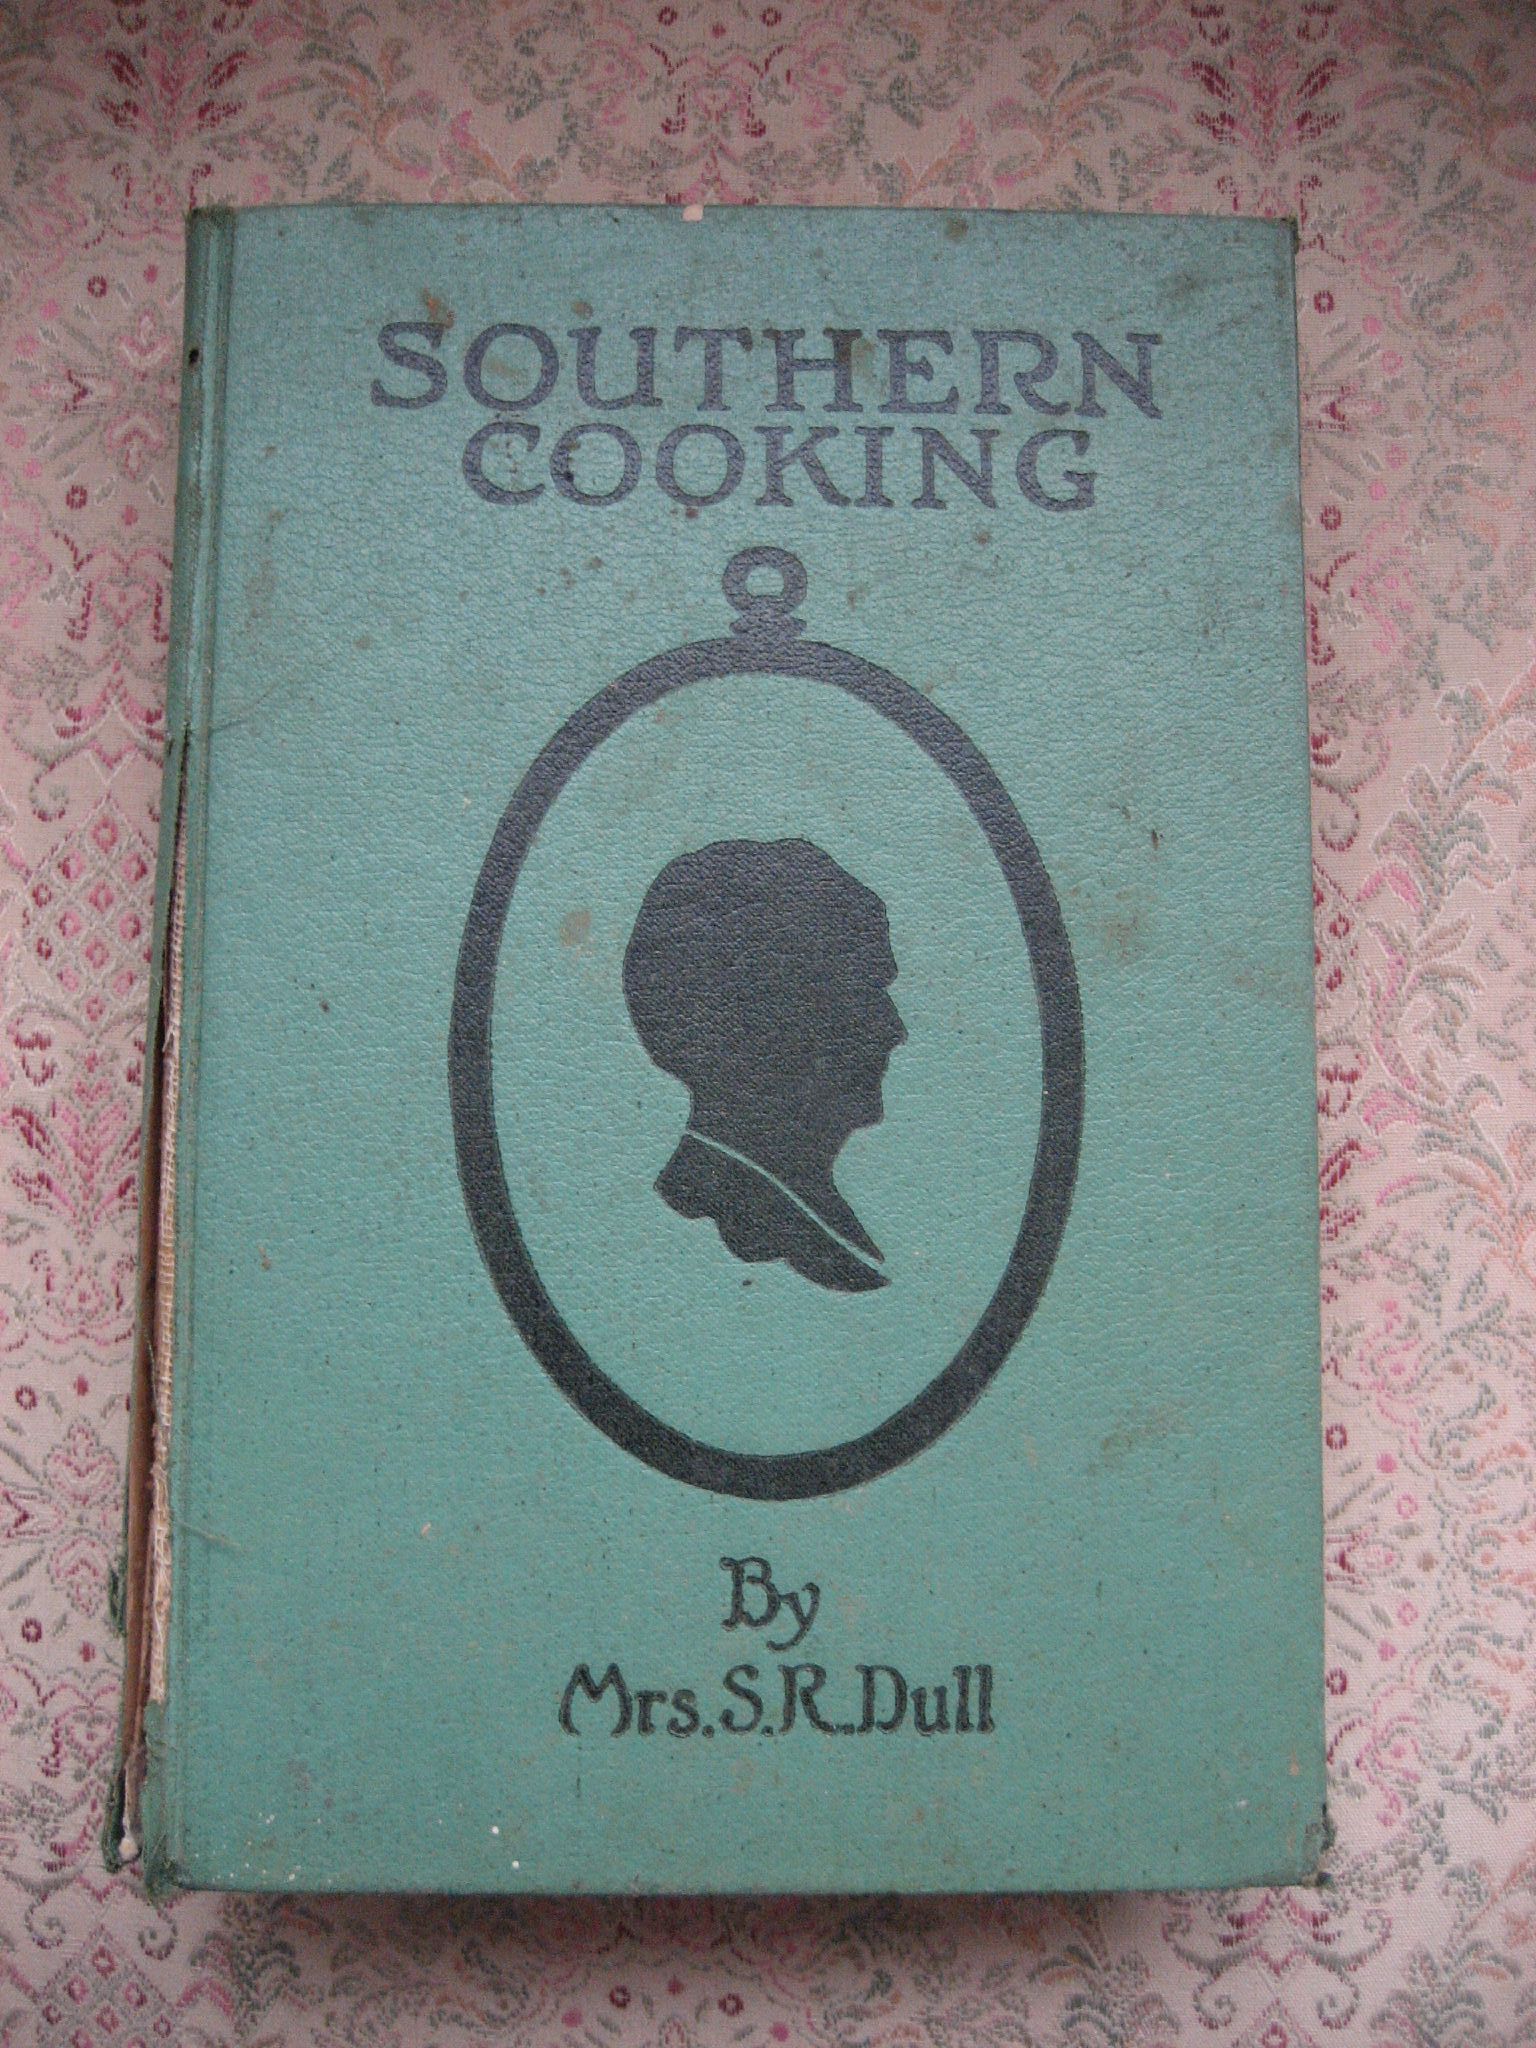 Original edition of Mrs. Dull's Southern Cooking